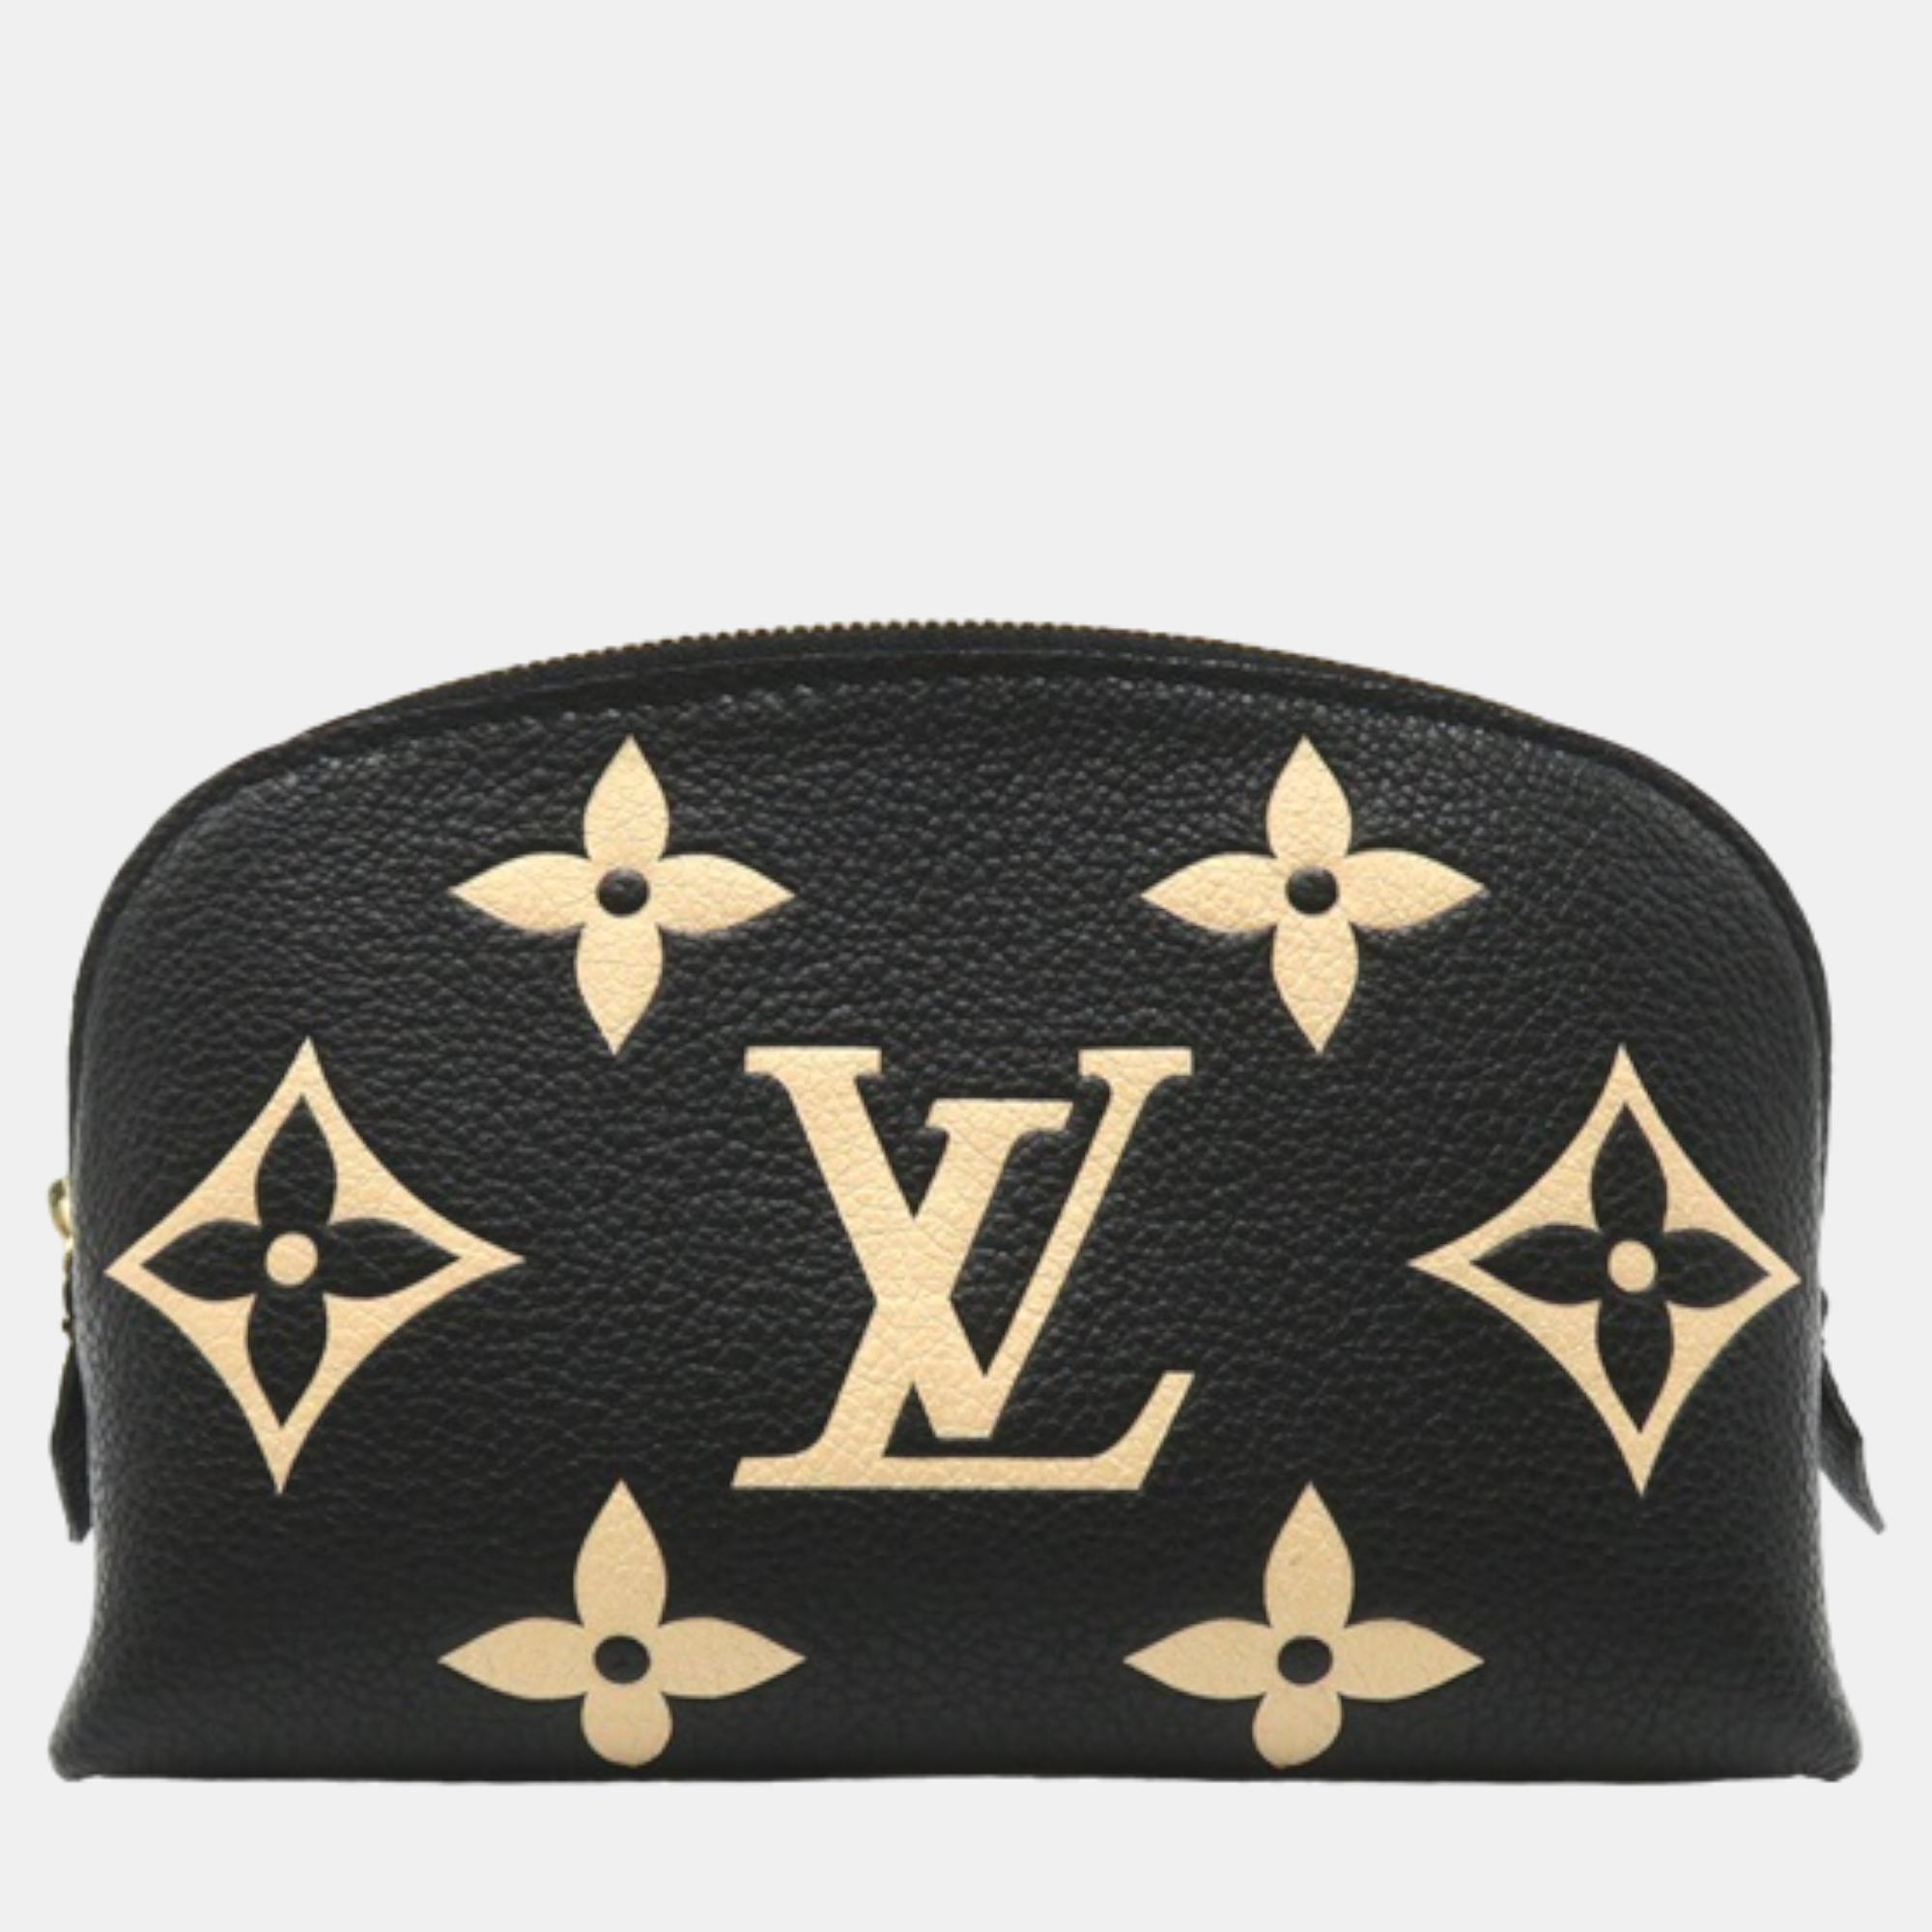 Pre-owned Louis Vuitton Black Leather Monogram Empreinte Giant Cosmetic Pouch Vanity Bag